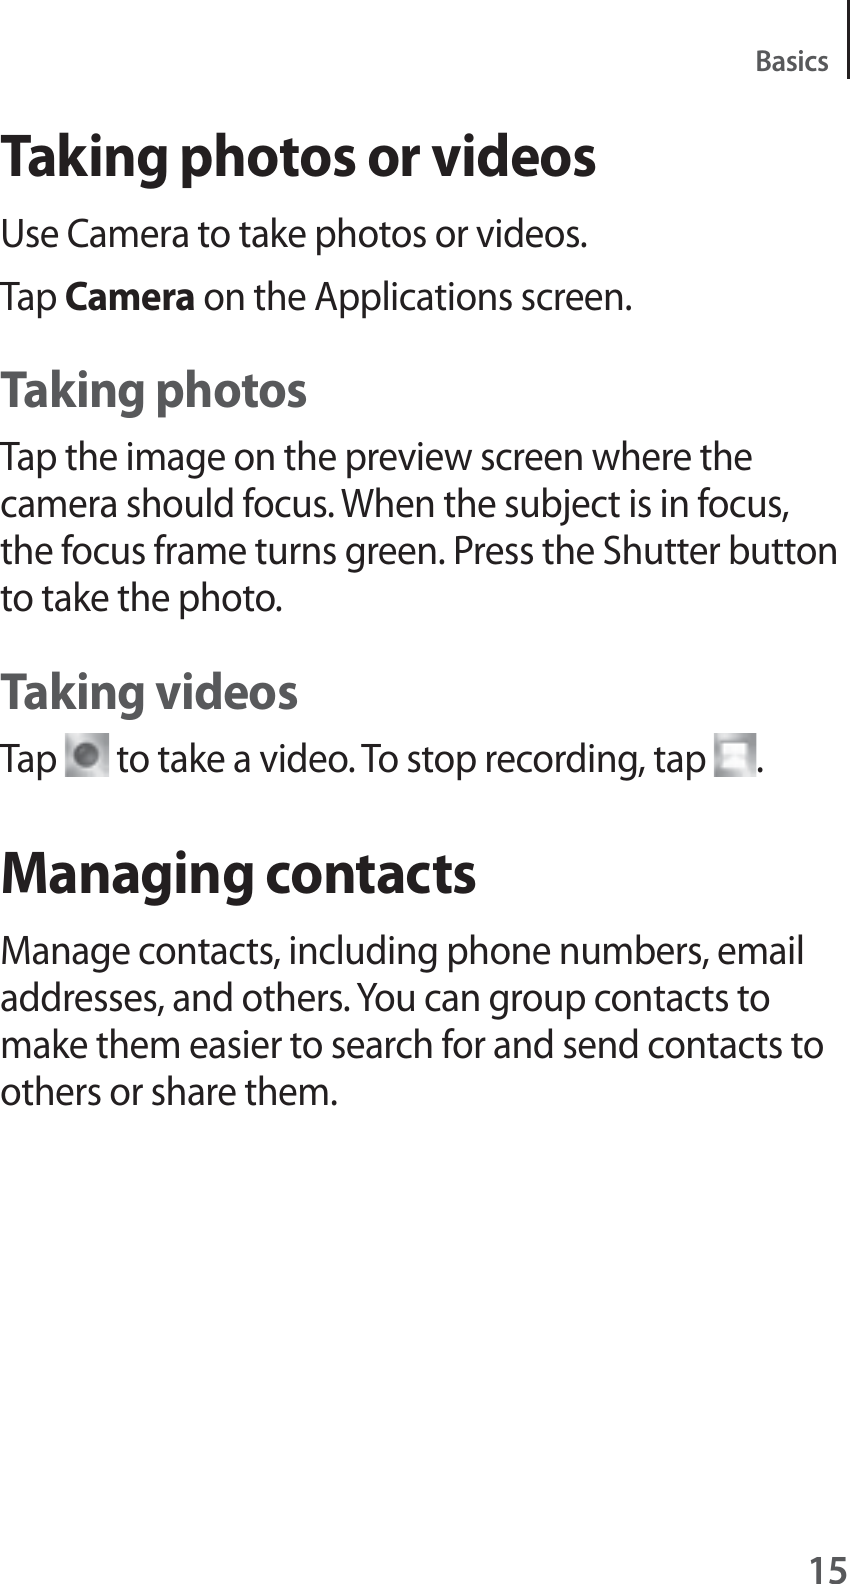 15BasicsTaking photos or videosUse Camera to take photos or videos.Tap Camera on the Applications screen.Taking photosTap the image on the preview screen where the camera should focus. When the subject is in focus, the focus frame turns green. Press the Shutter button to take the photo.Taking videosTap   to take a video. To stop recording, tap  .Managing contactsManage contacts, including phone numbers, email addresses, and others. You can group contacts to make them easier to search for and send contacts to others or share them.